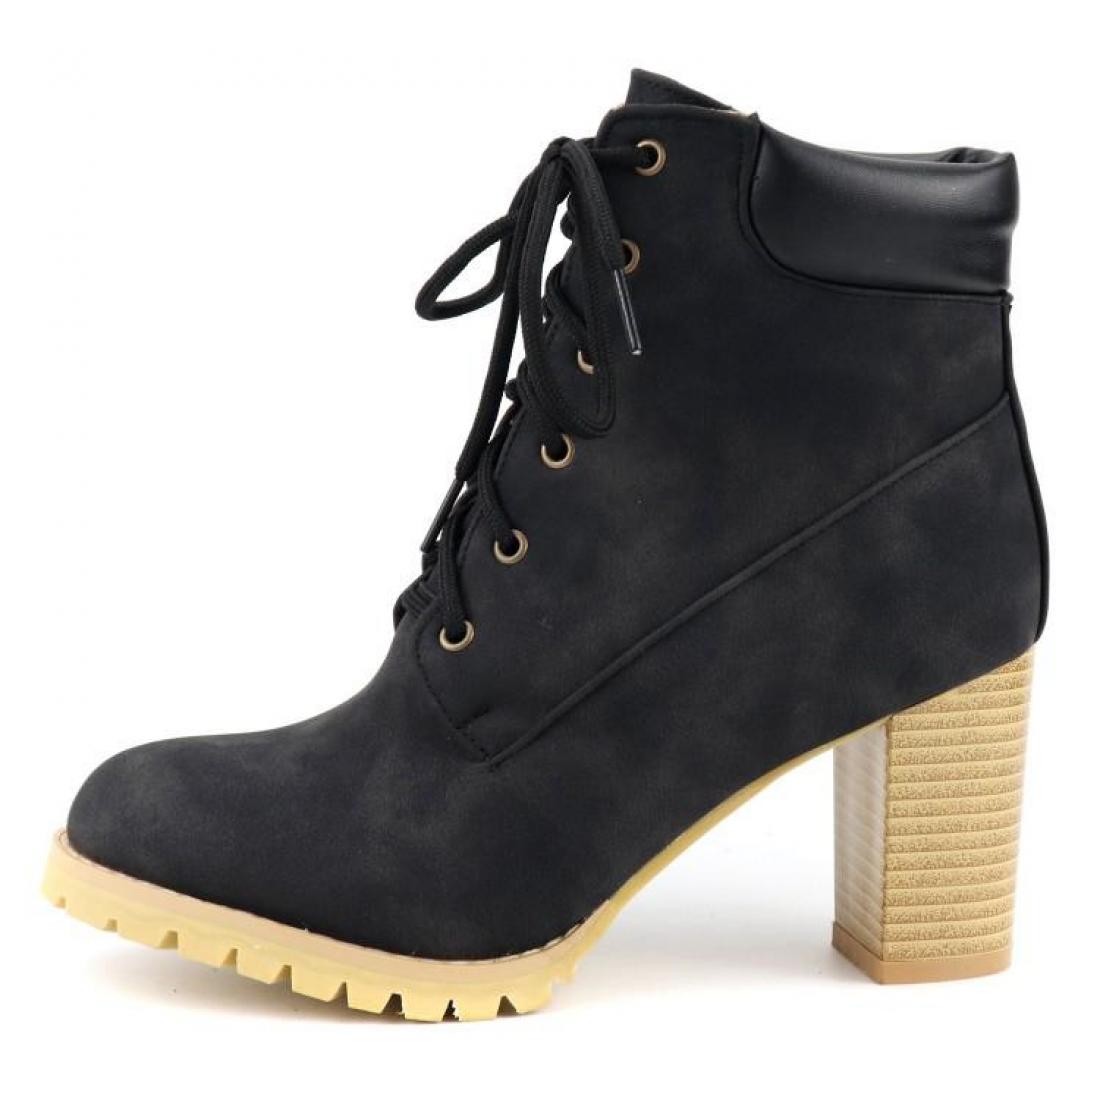 Black Suede Lace Up Military Combat High Wooden Heels Boots ...